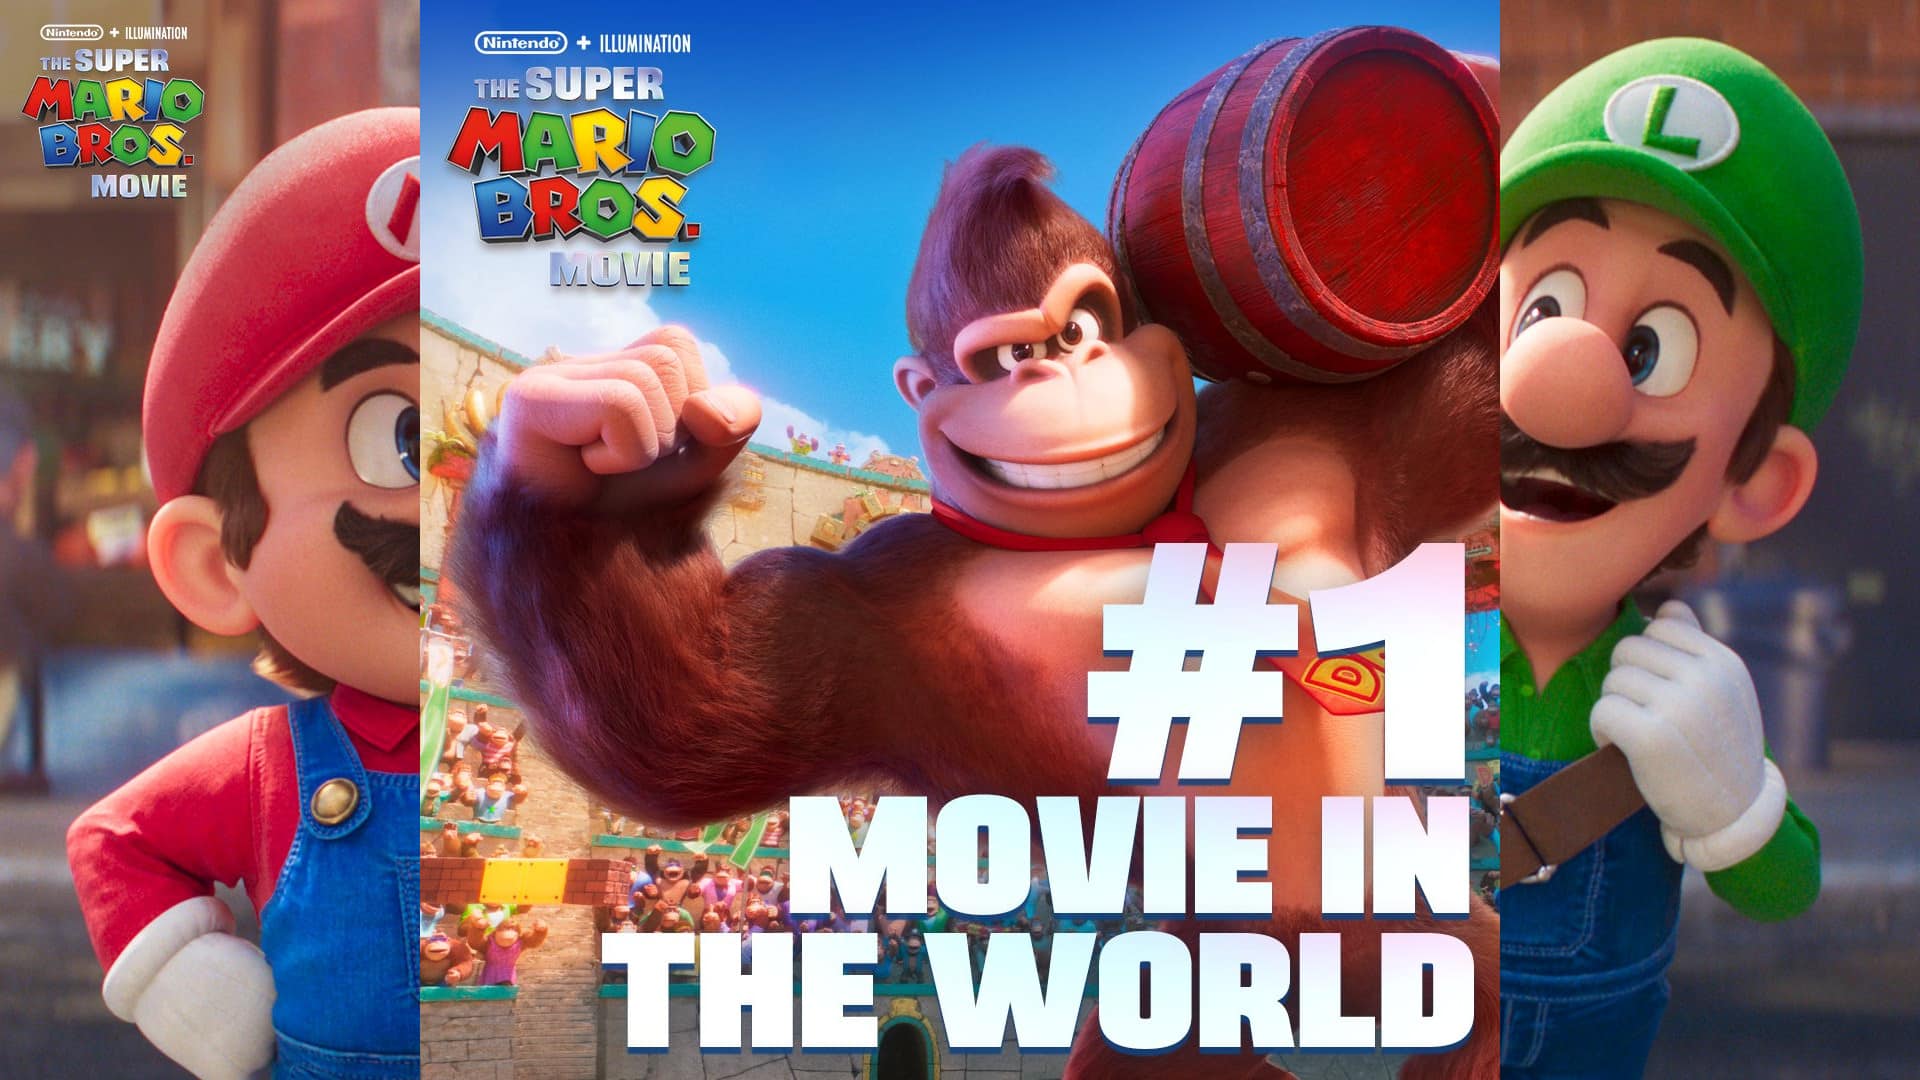 The Super Mario Bros. Movie Becomes The #1 Most Popular Animated Movie Ever